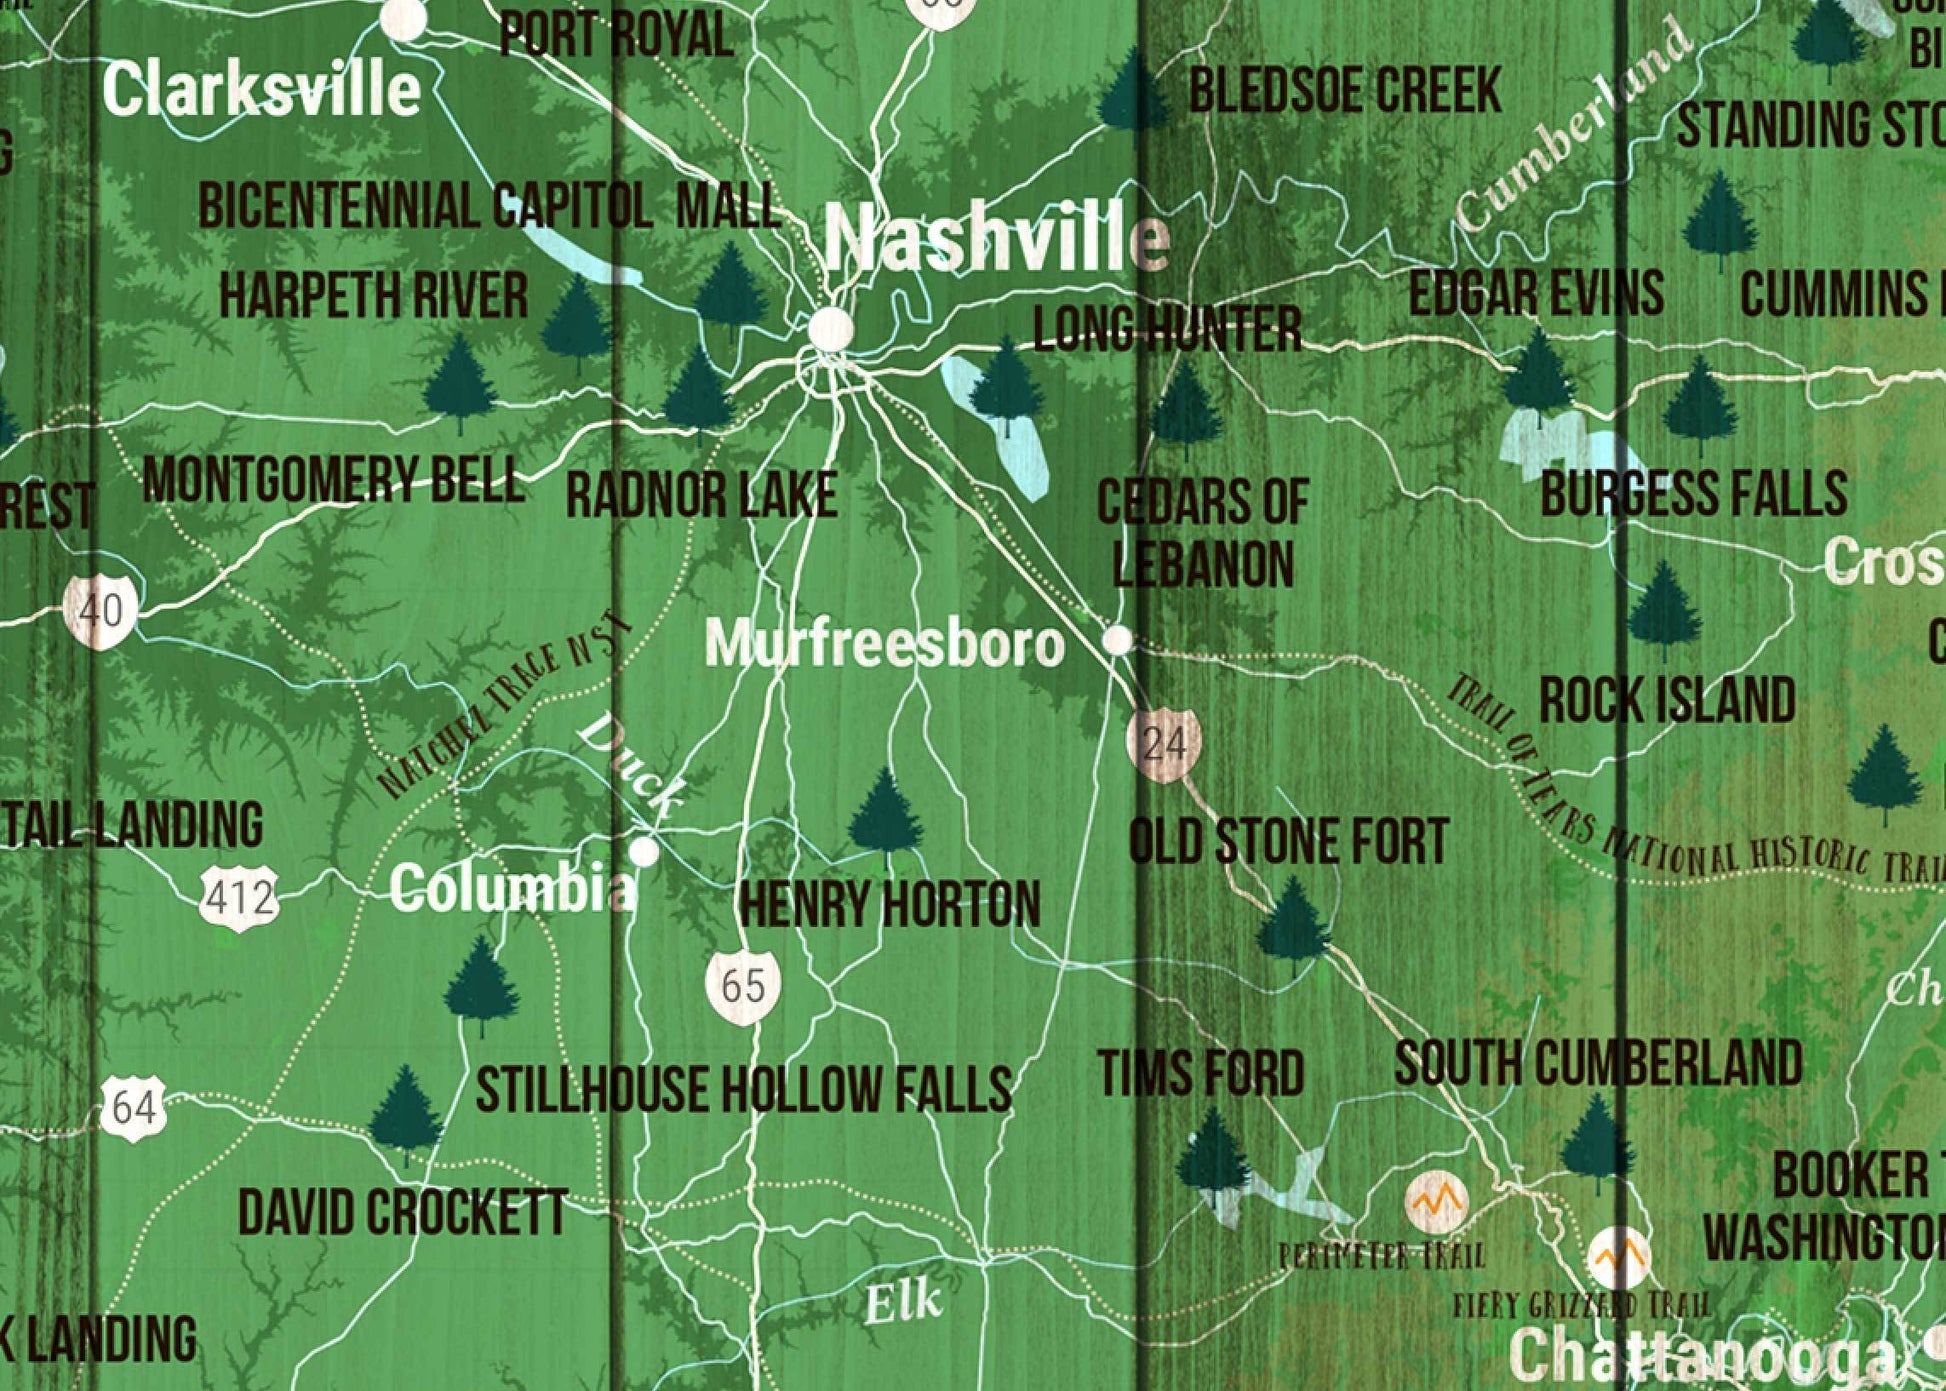 Tennessee State Park Map, Explore Tennessee Map World Vibe Studio 